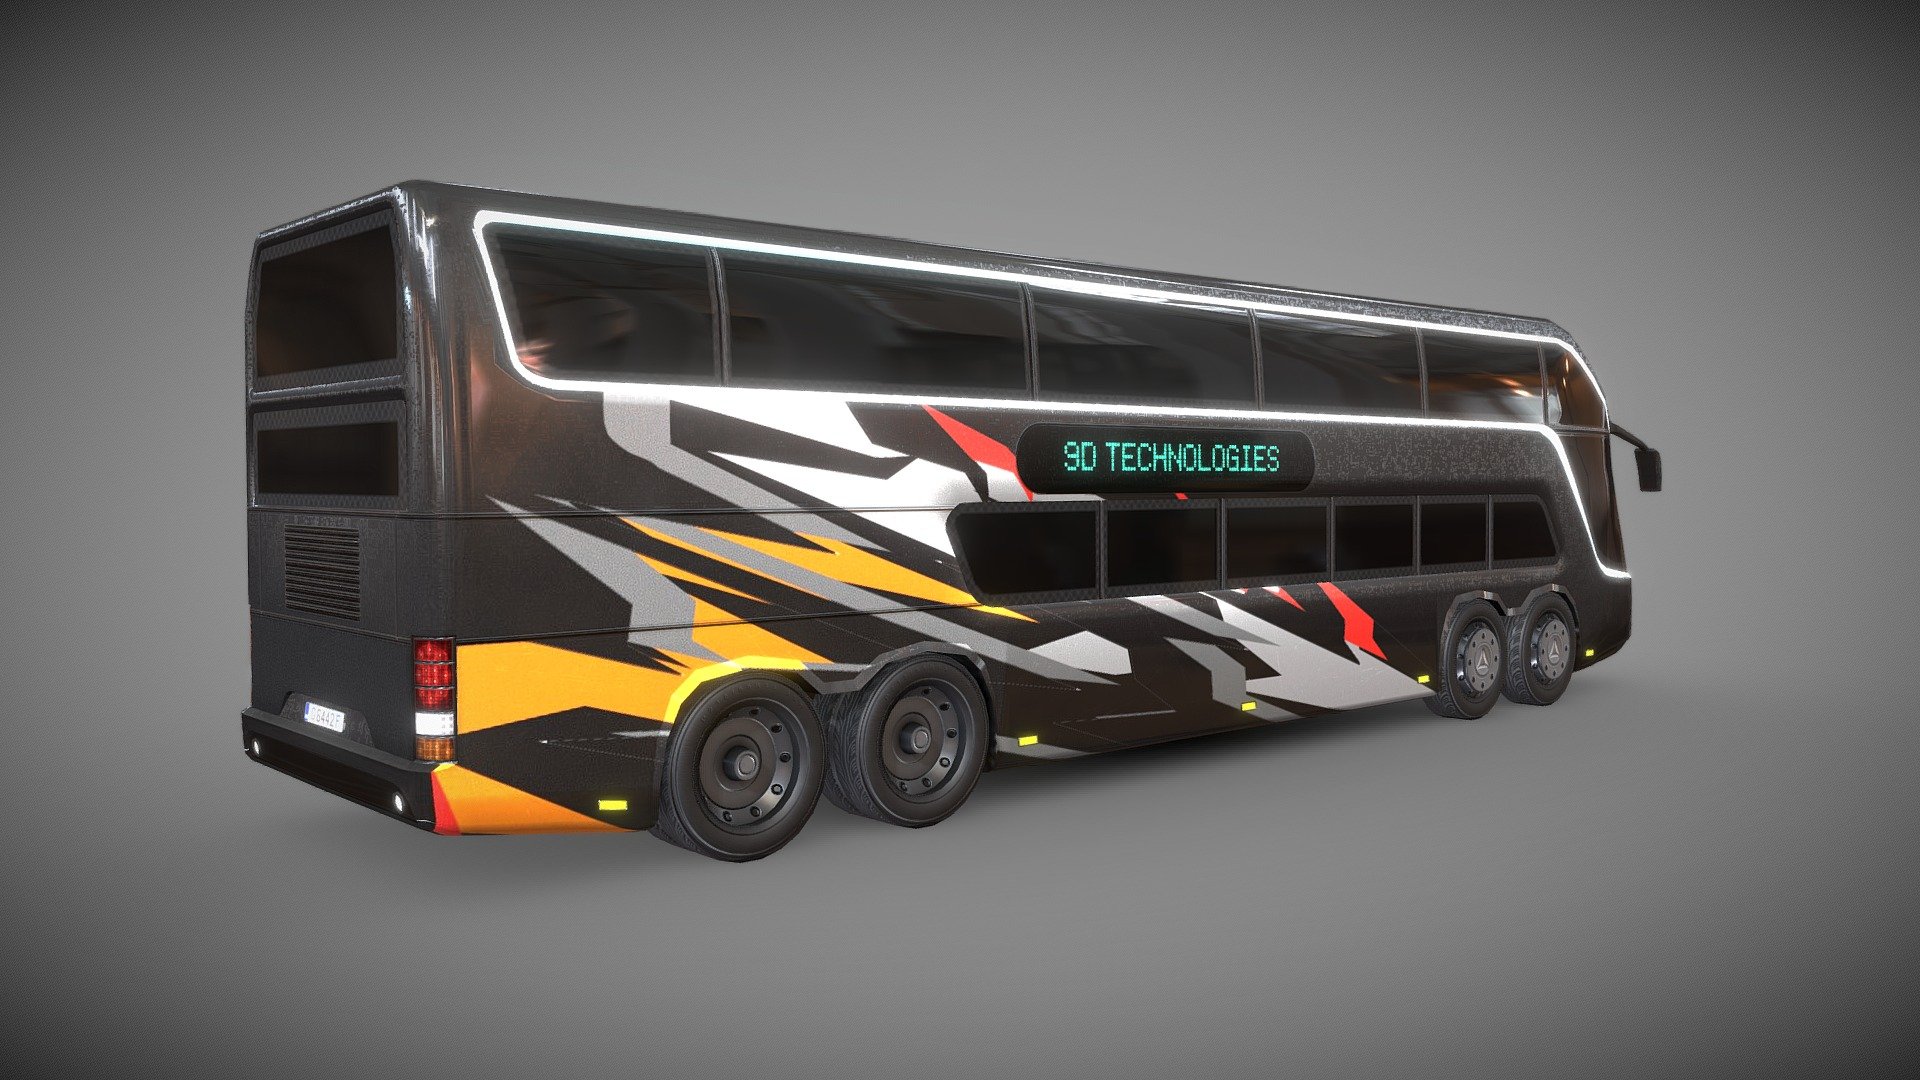 Neoplan Megaliner gameready 3d model with PBR textures under 10k game verts, modeled in maya and textured in substance painter - Neoplan Megaliner Game ready 3d model - 3D model by laraibbokhari 3d model